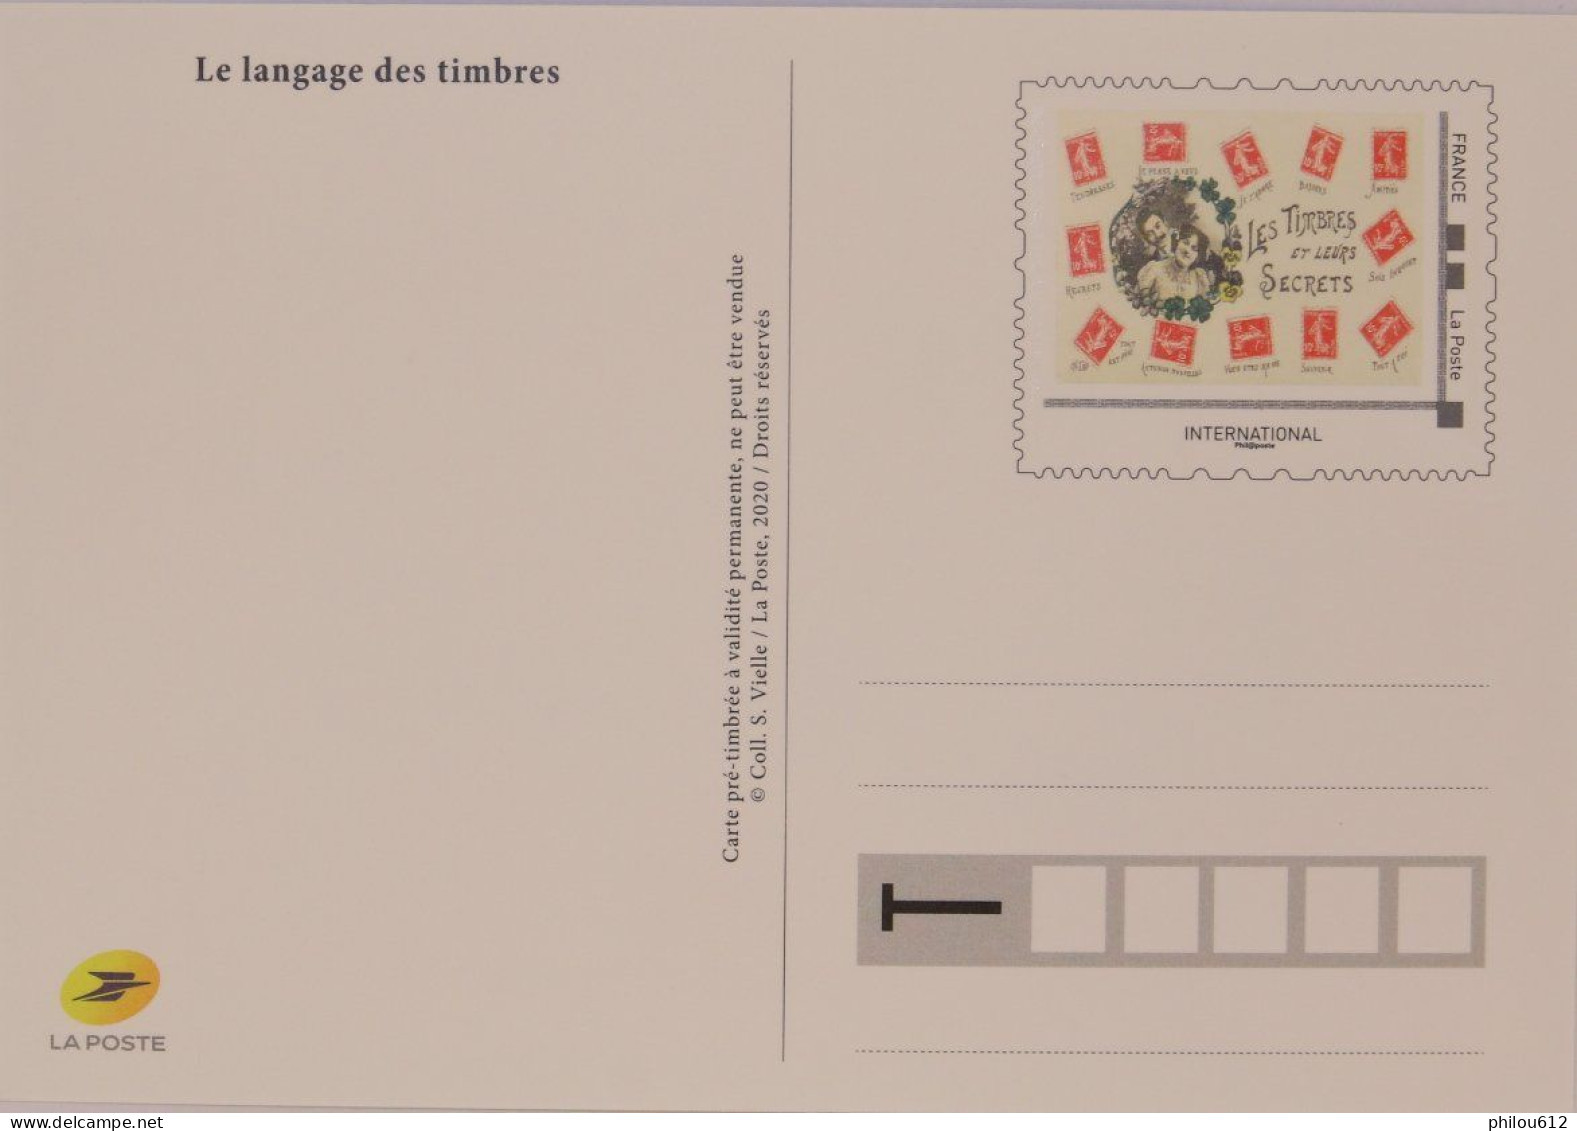 Le Langage Des Timbres - 2020 - Prêts-à-poster:Stamped On Demand & Semi-official Overprinting (1995-...)